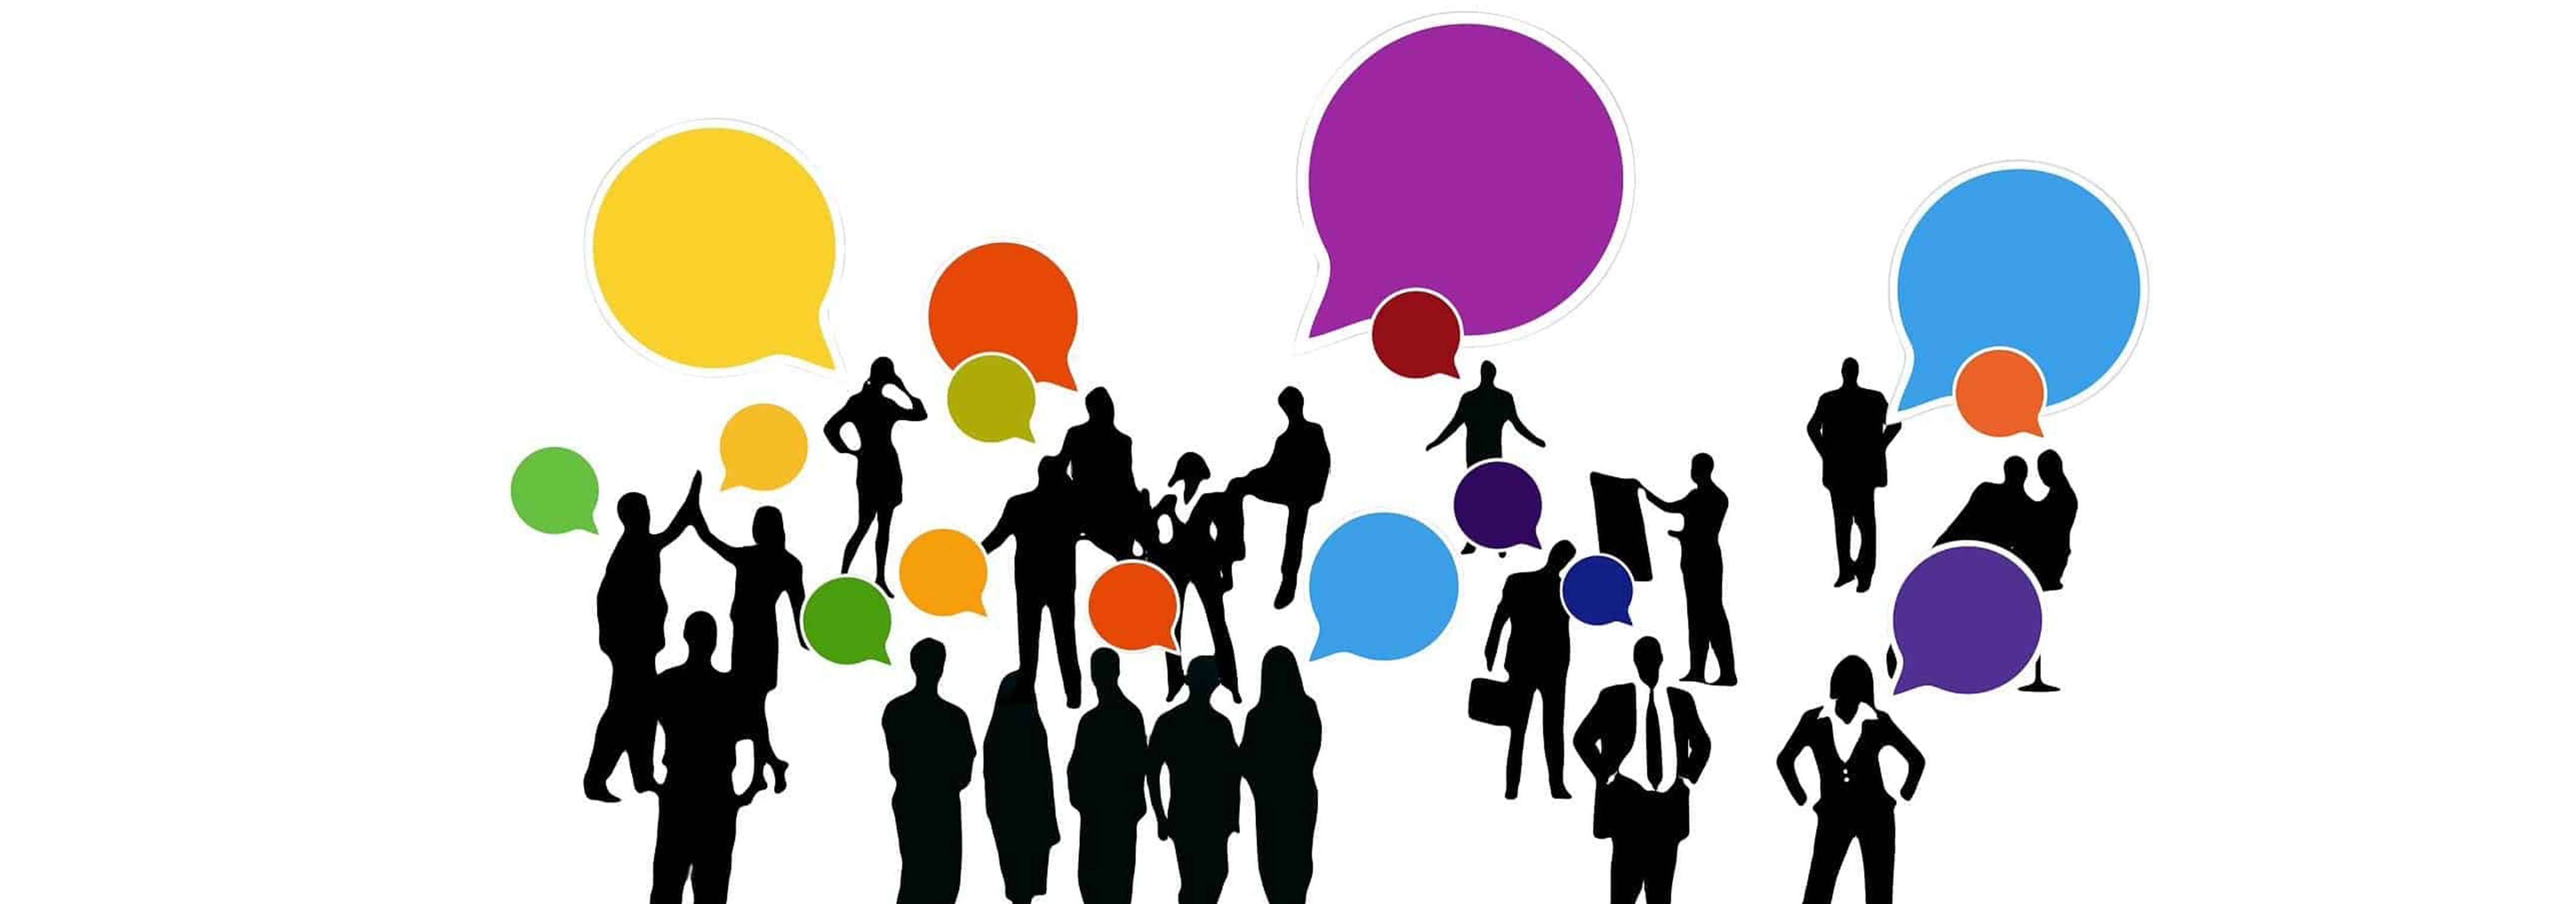 people networking clip art